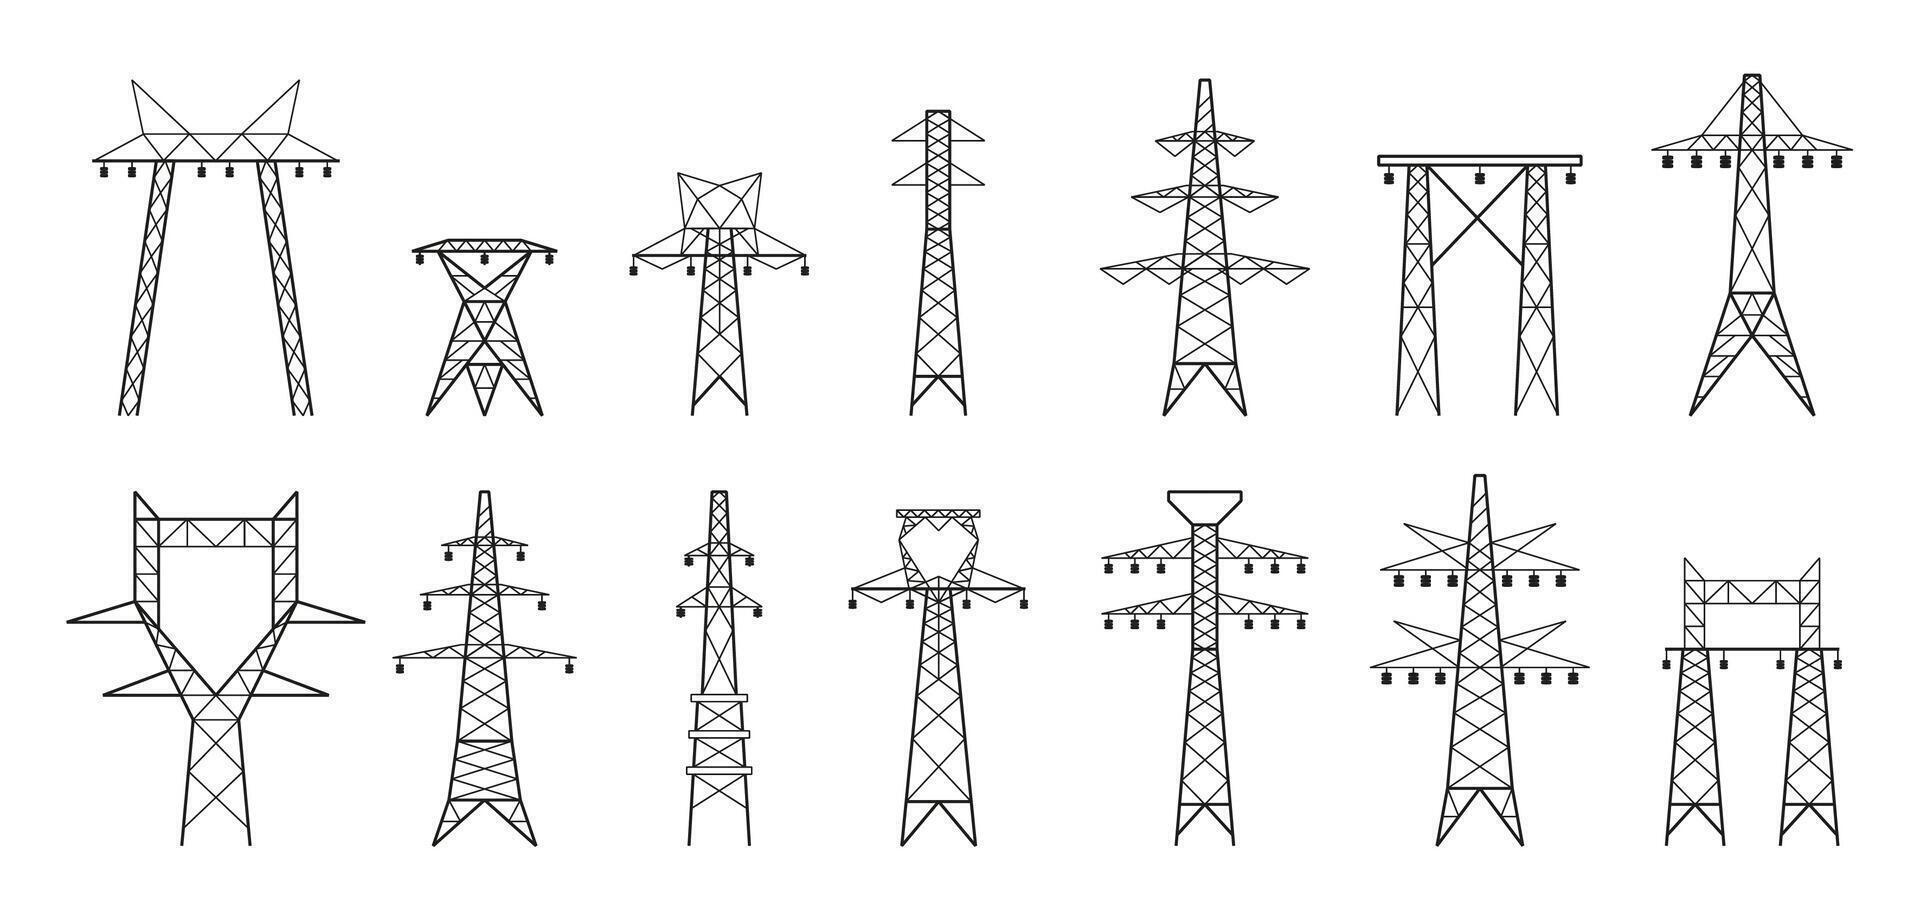 Electric line pole. Grid power transmission and distribution, high voltage pylons, cable and wire transmission infrastructure. Vector isolated set